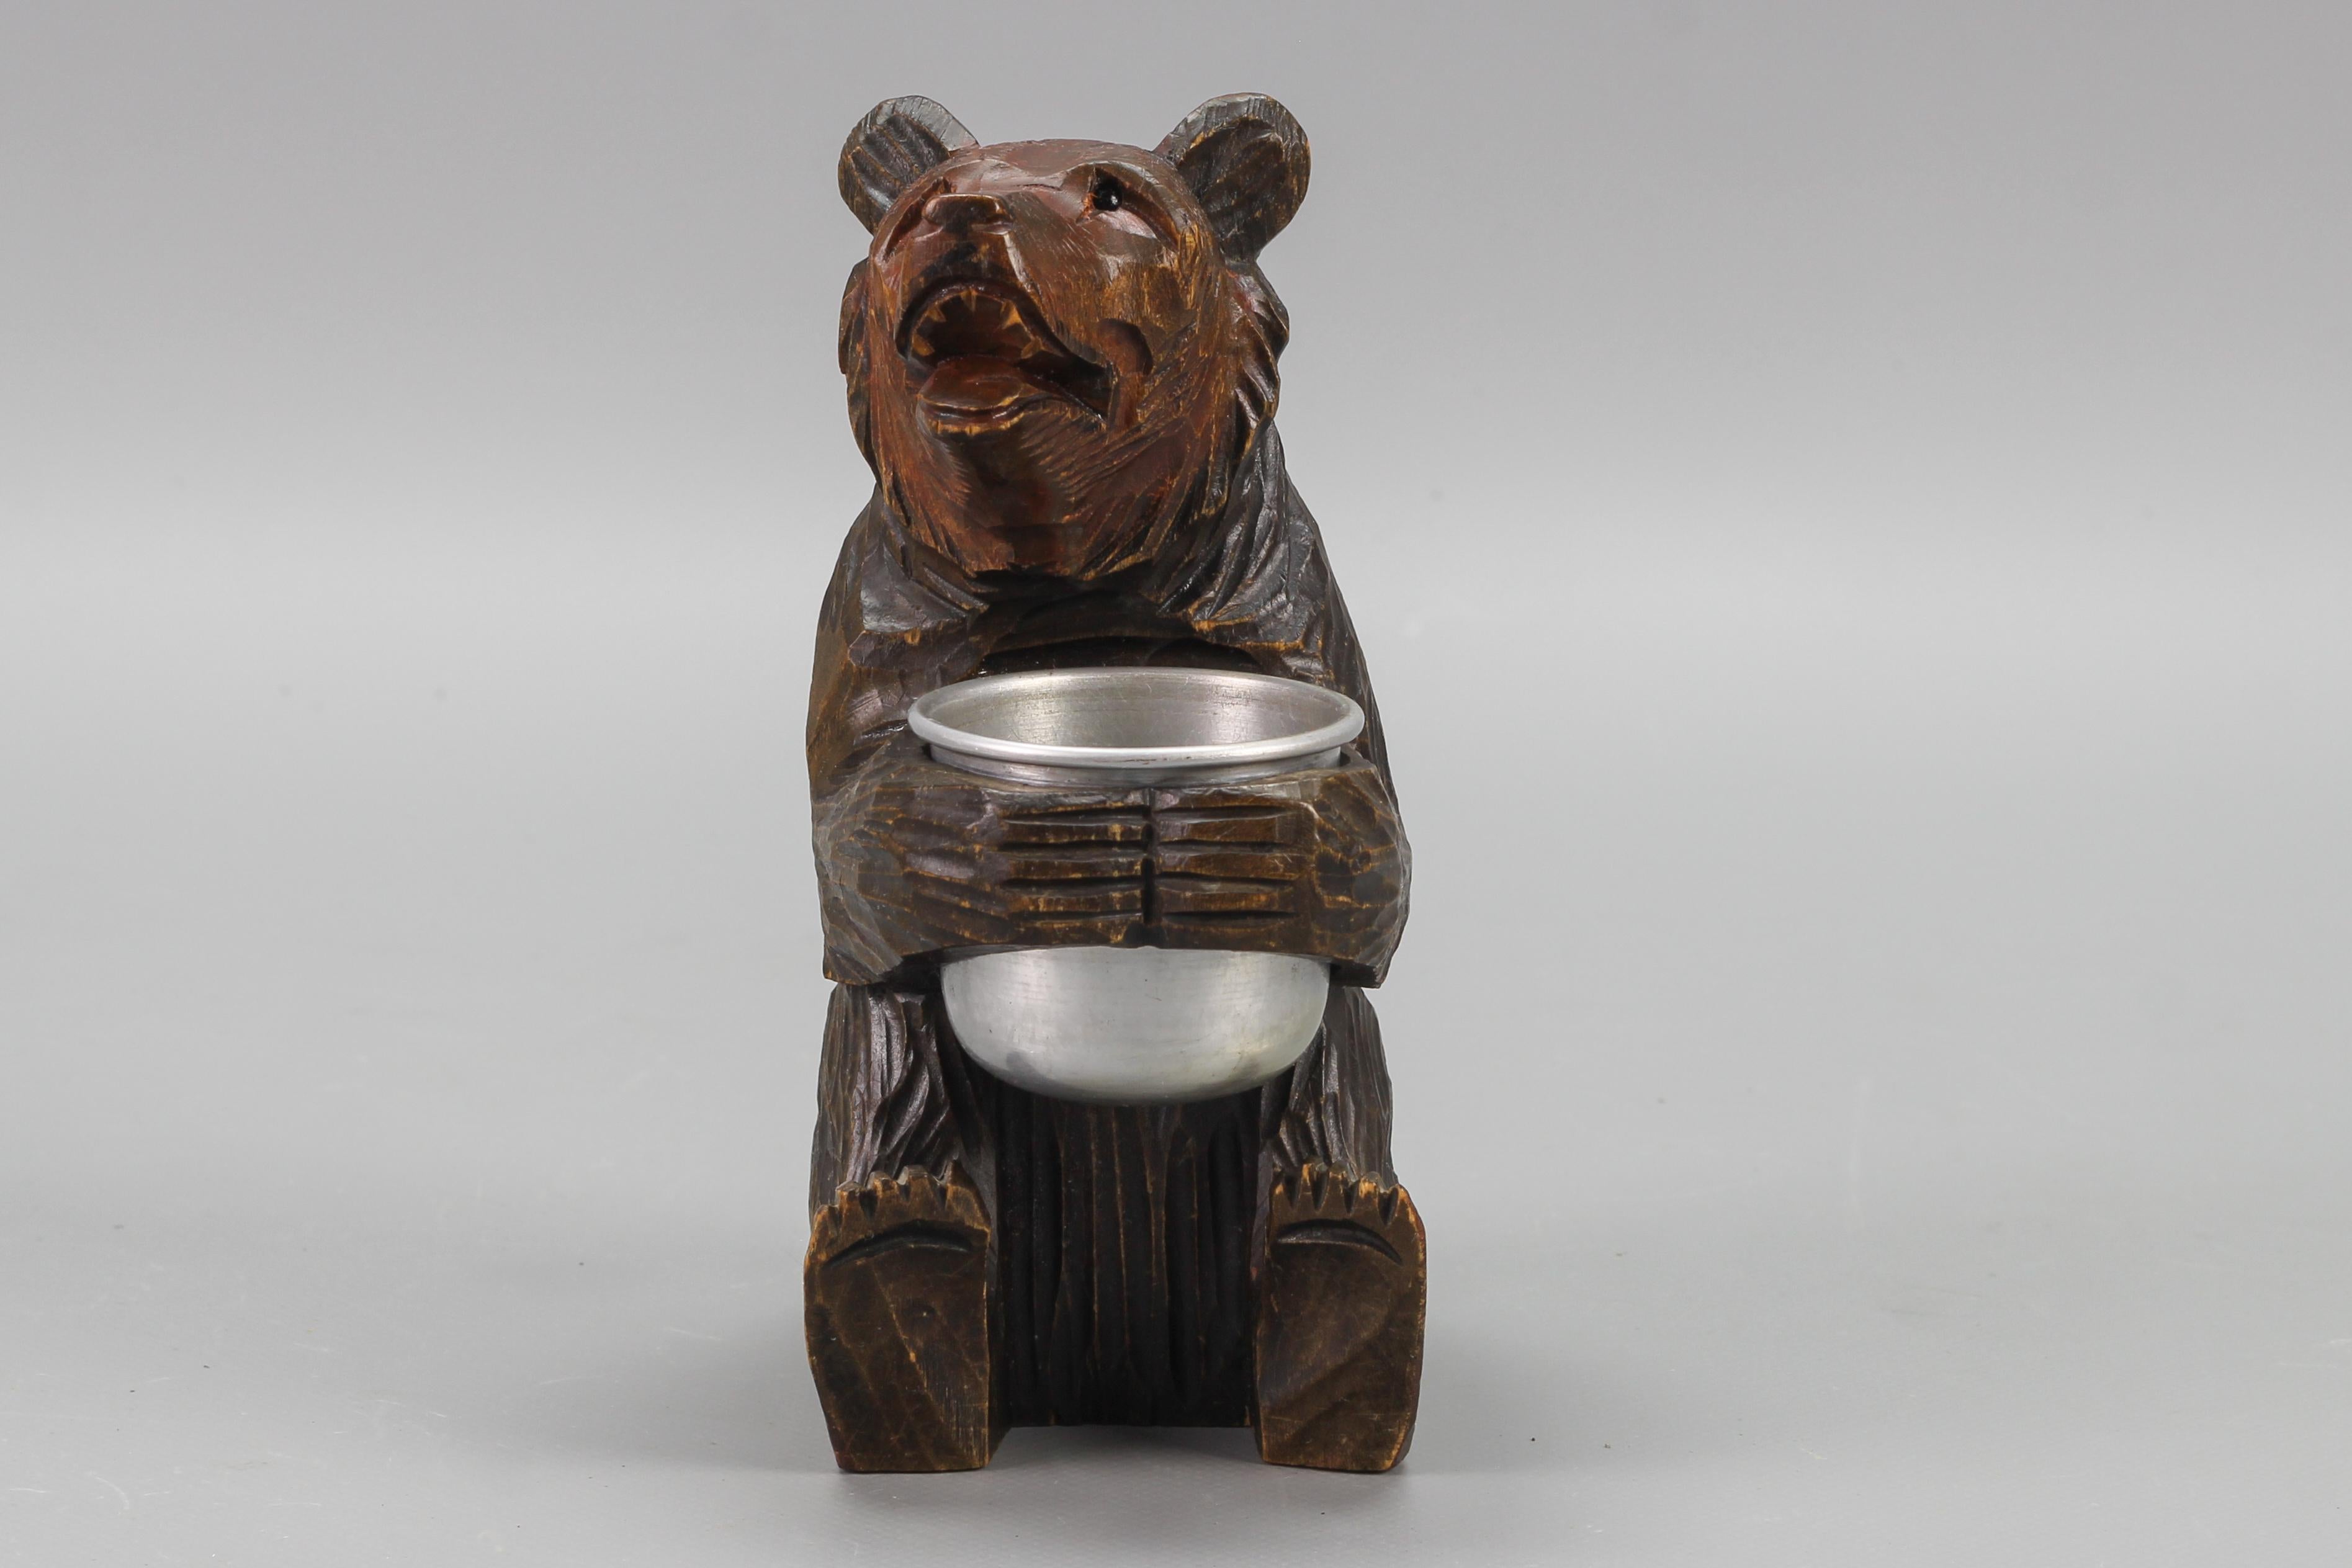 Hand-carved Black Forest style bear with aluminum pot, from ca. the 1920s.
This beautiful hand-carved wooden, linden-wood, seated bear is holding an aluminum pot. Nicely detailed, with glass eyes.
Can be used for the storage of small items on a